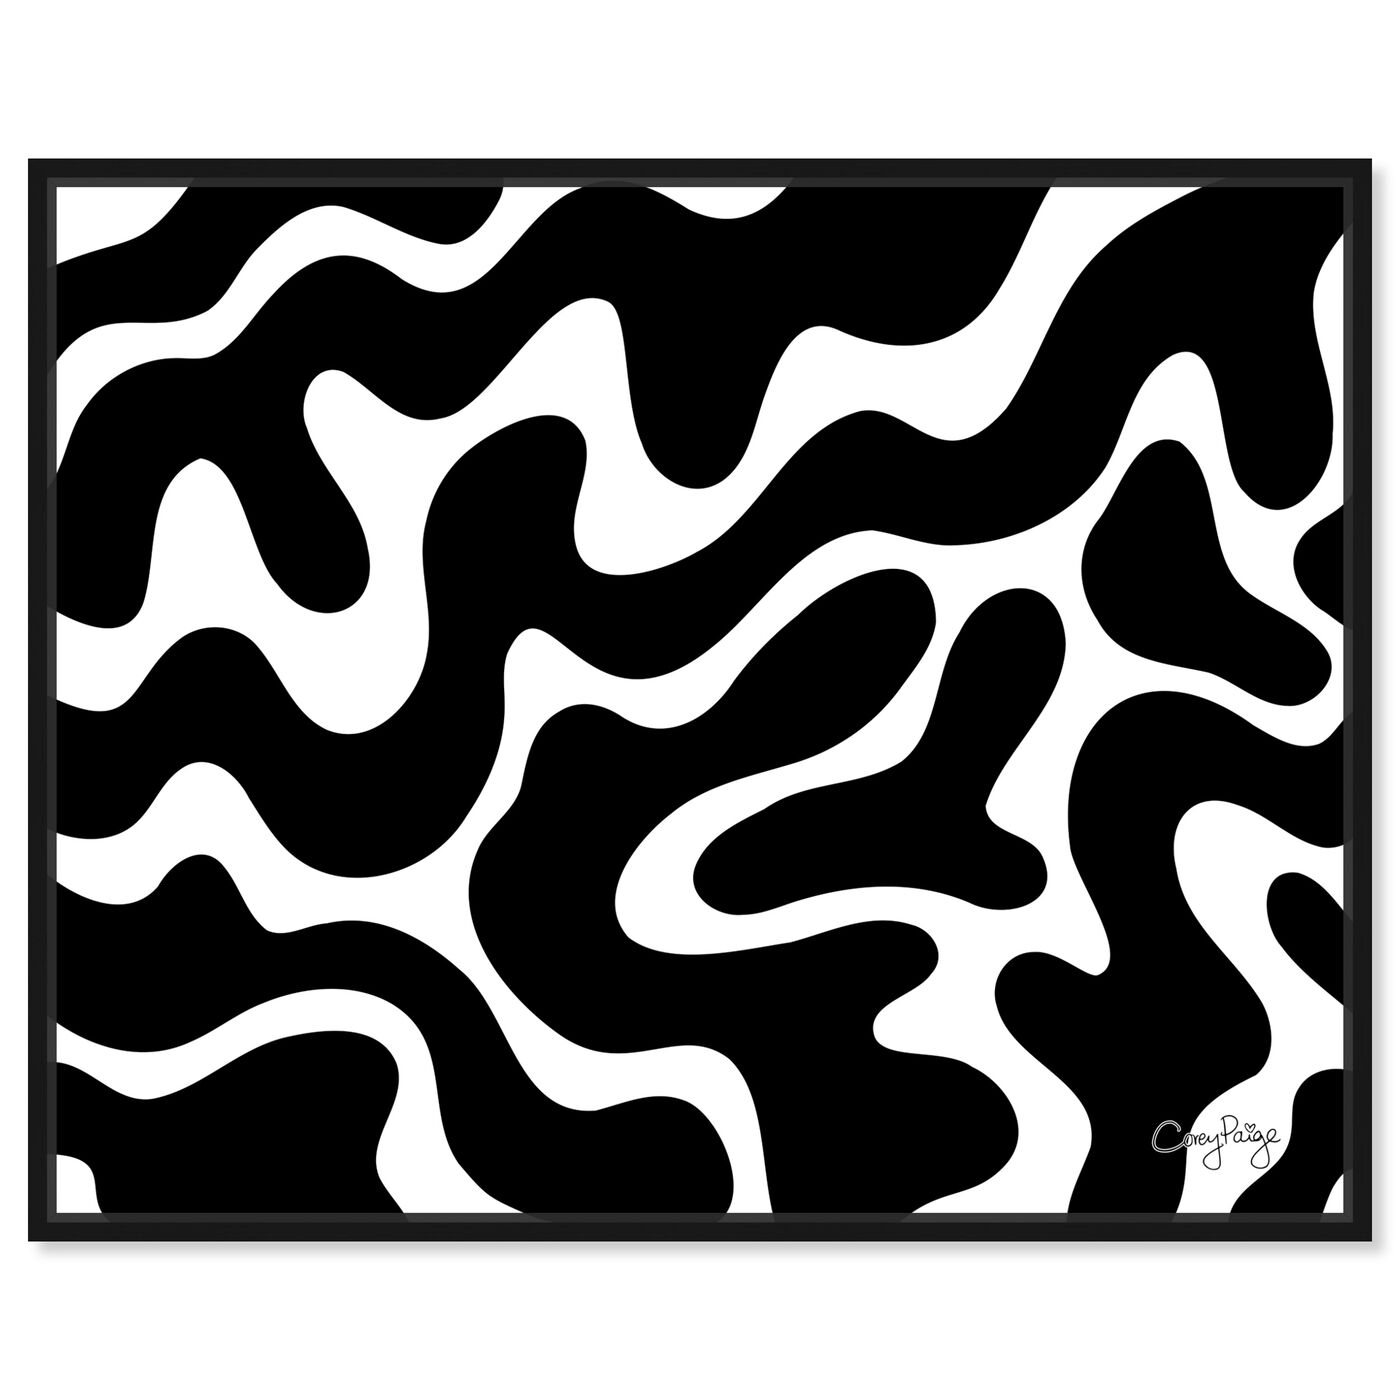 Front view of Corey Paige - Black & White Abstract featuring abstract and shapes art.